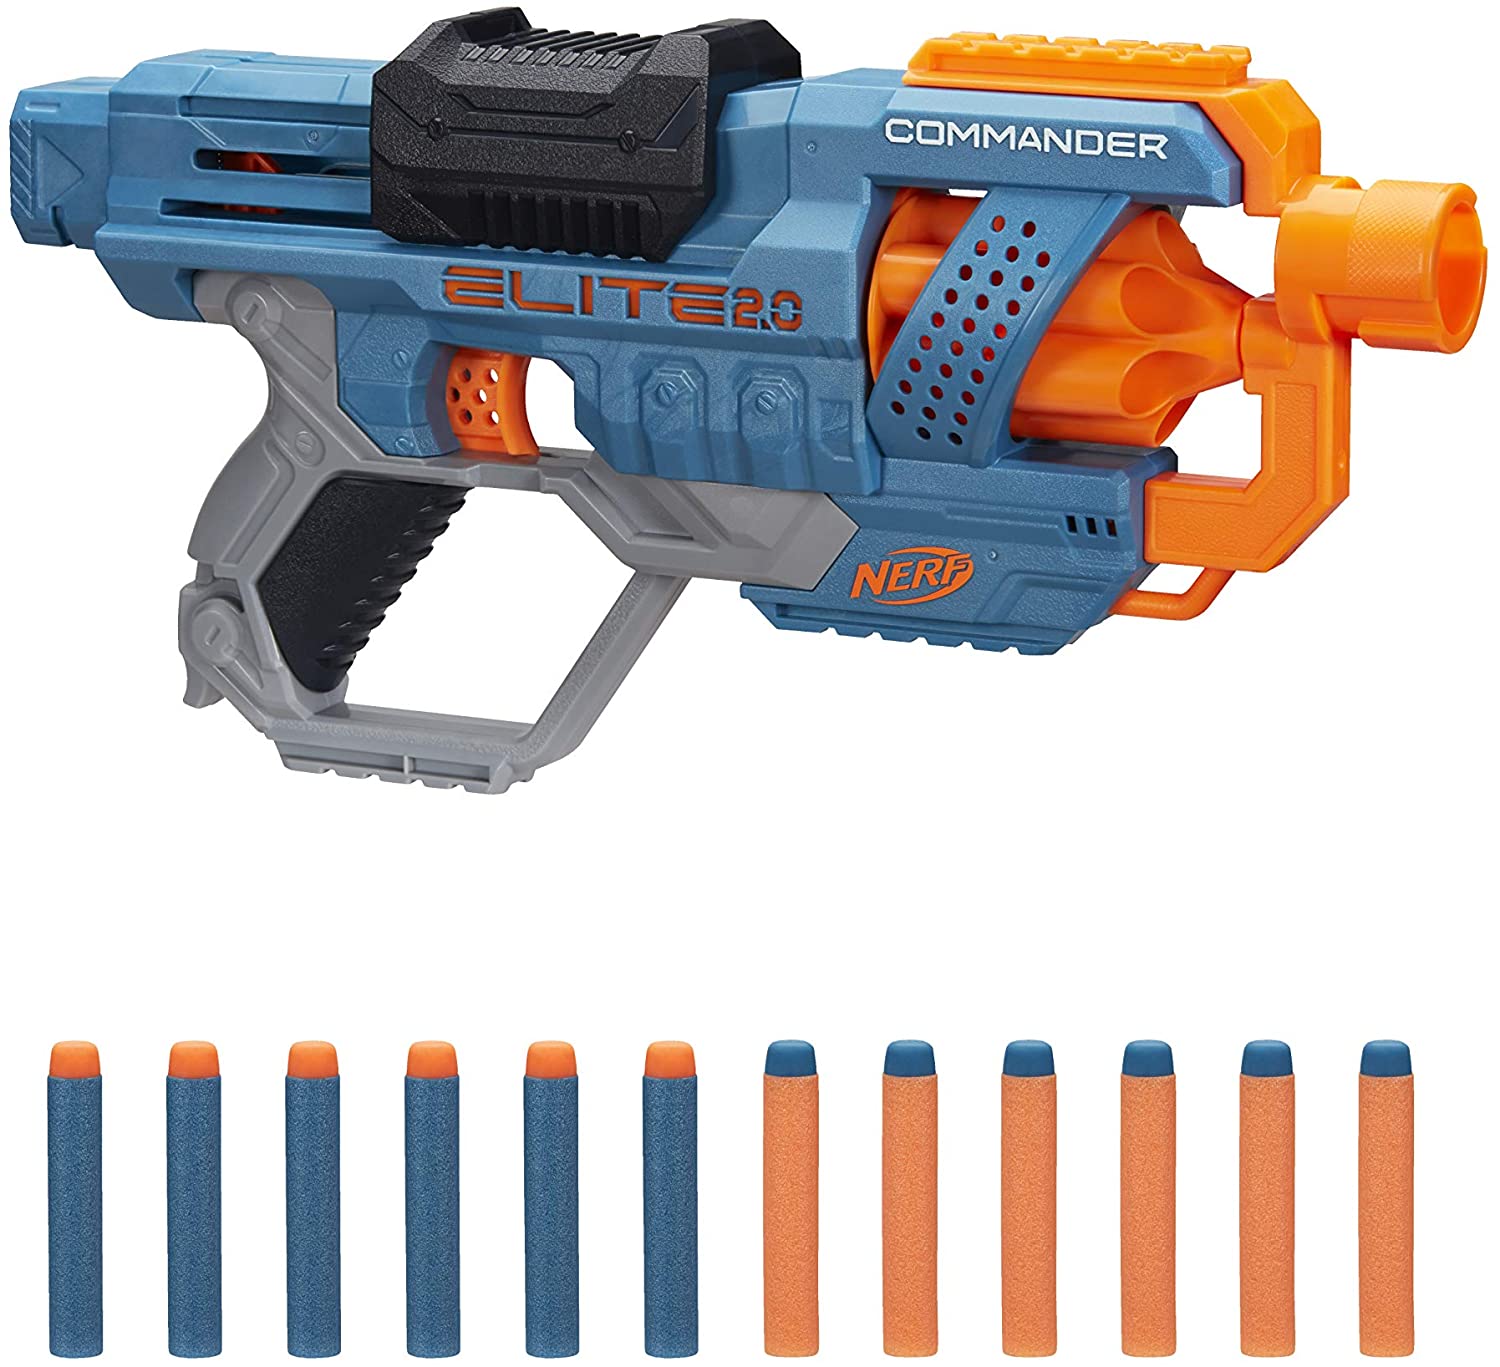 NERF Elite 2.0 Commander RD-6 Blaster - with 12 Official Nerf darts